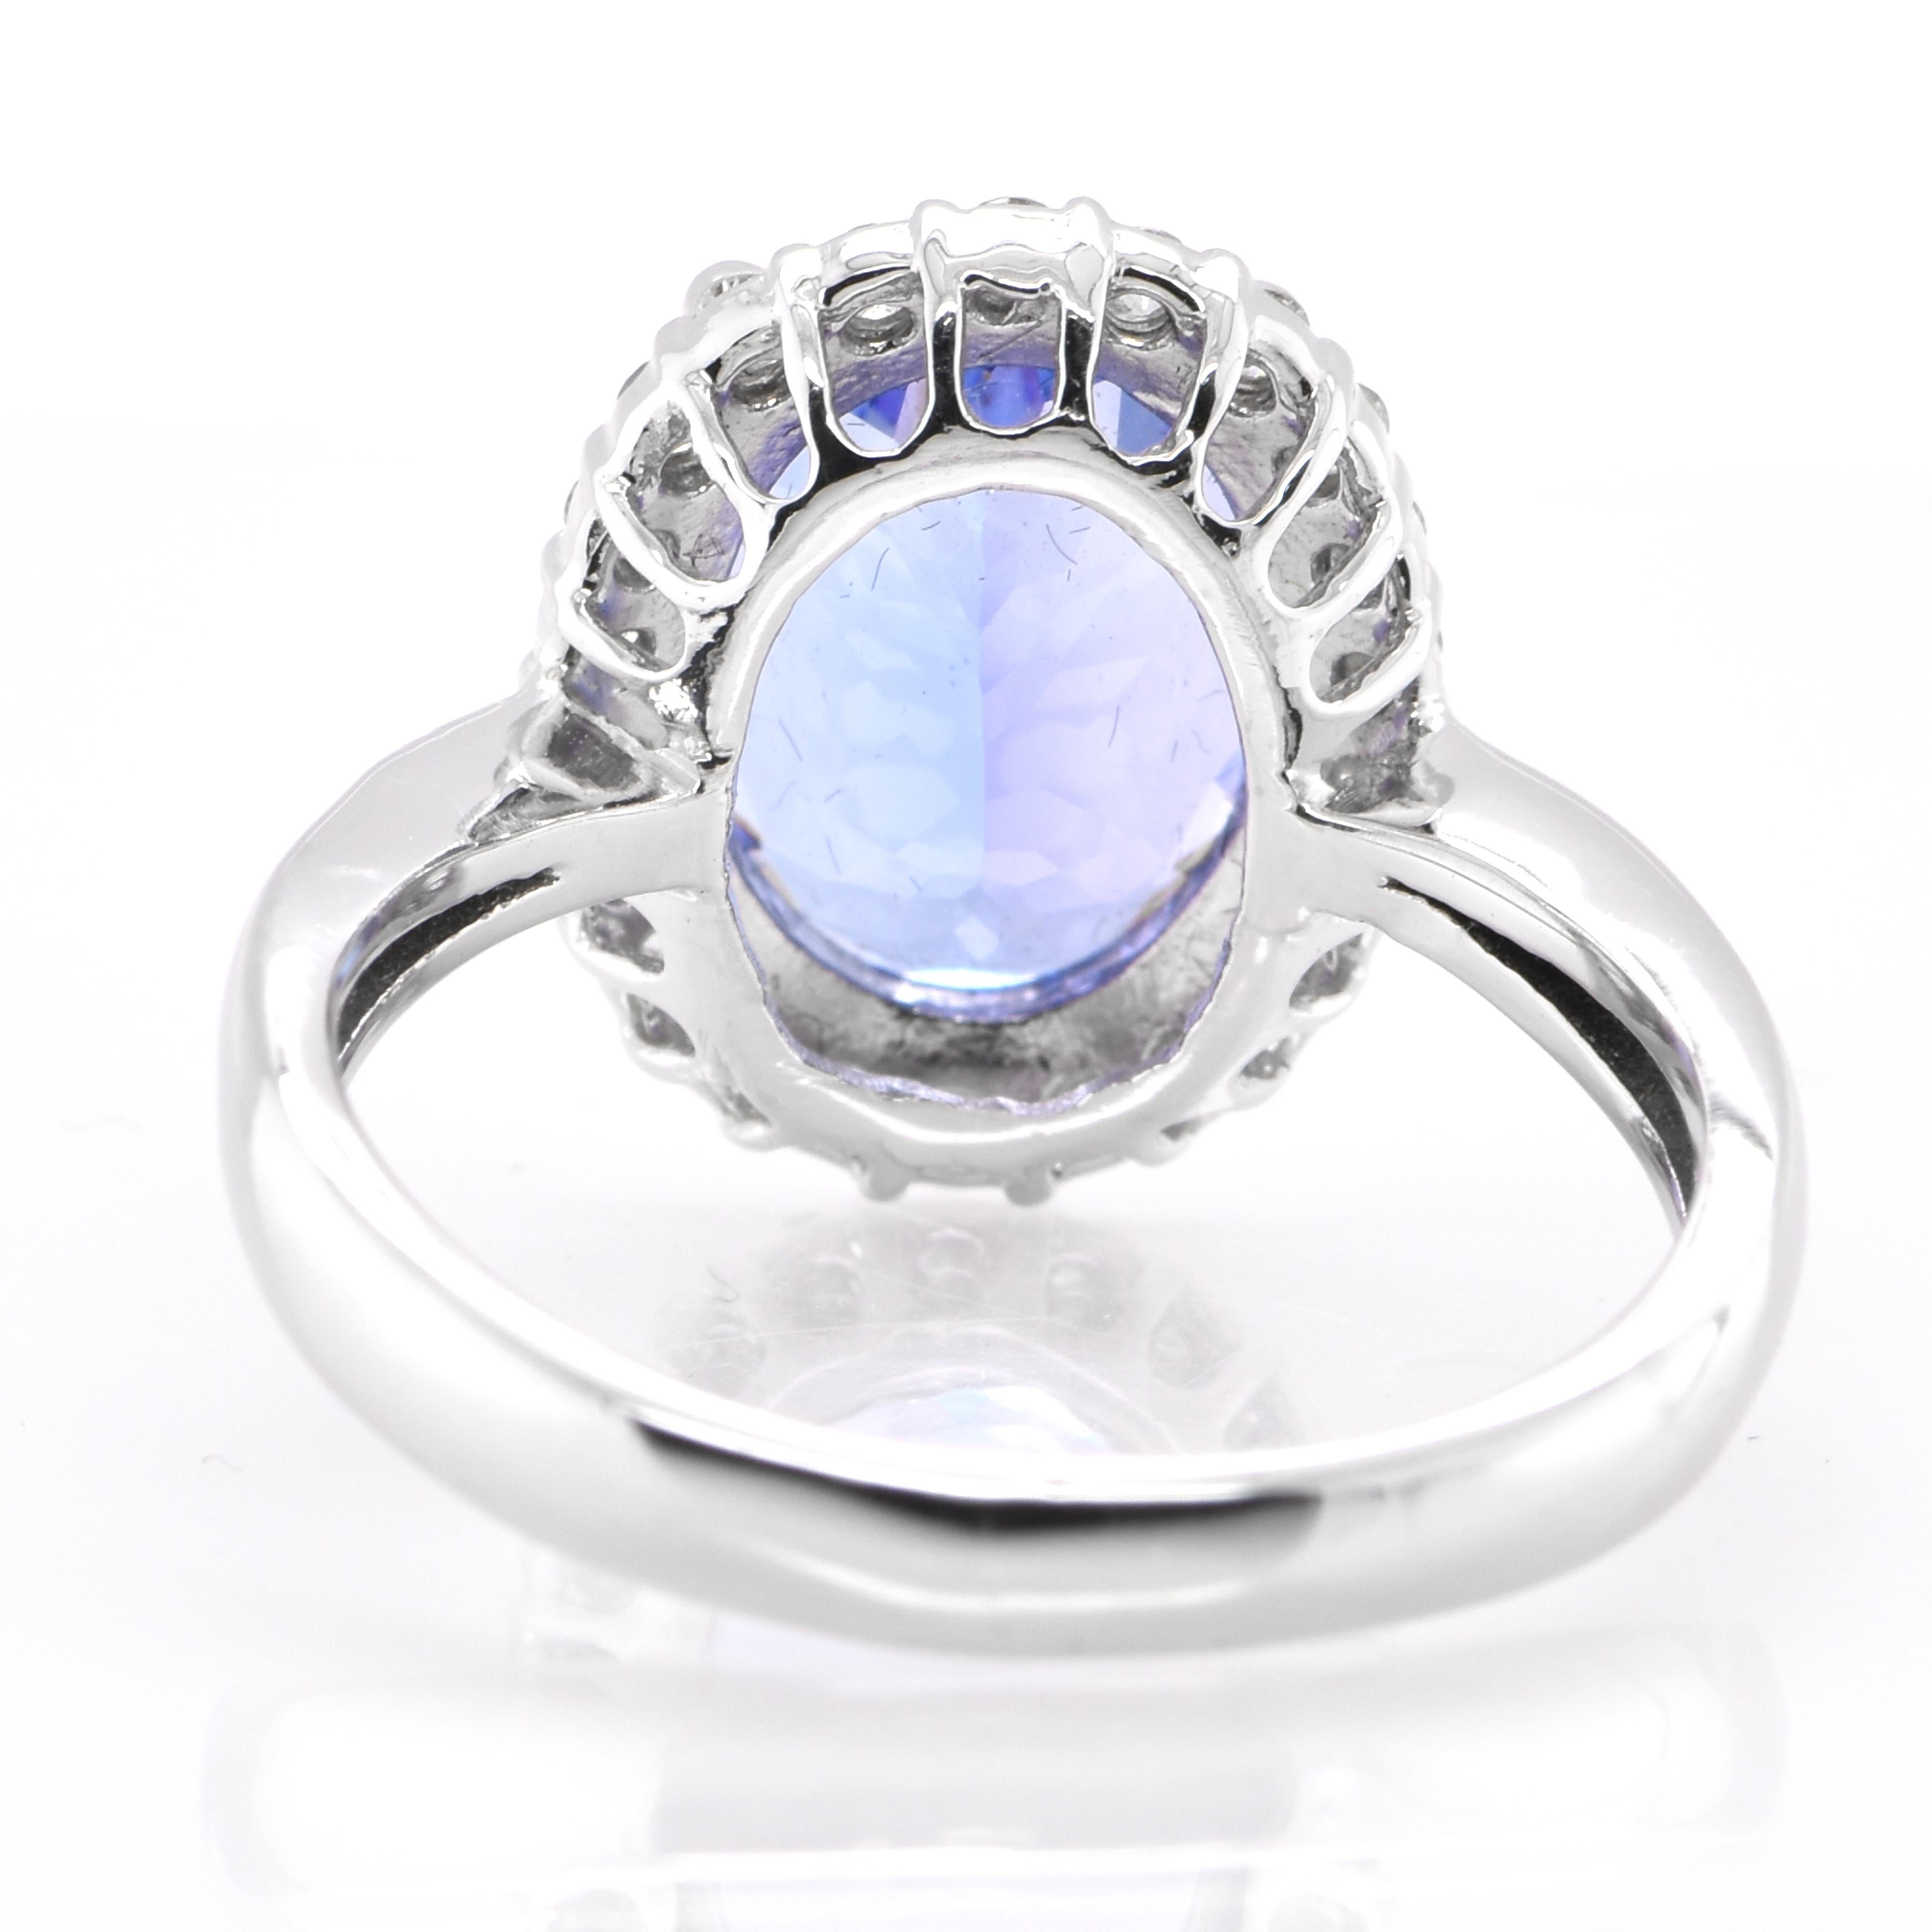 Women's 3.13 Carat Natural Tanzanite and Diamond Cocktail Ring Set in Platinum For Sale